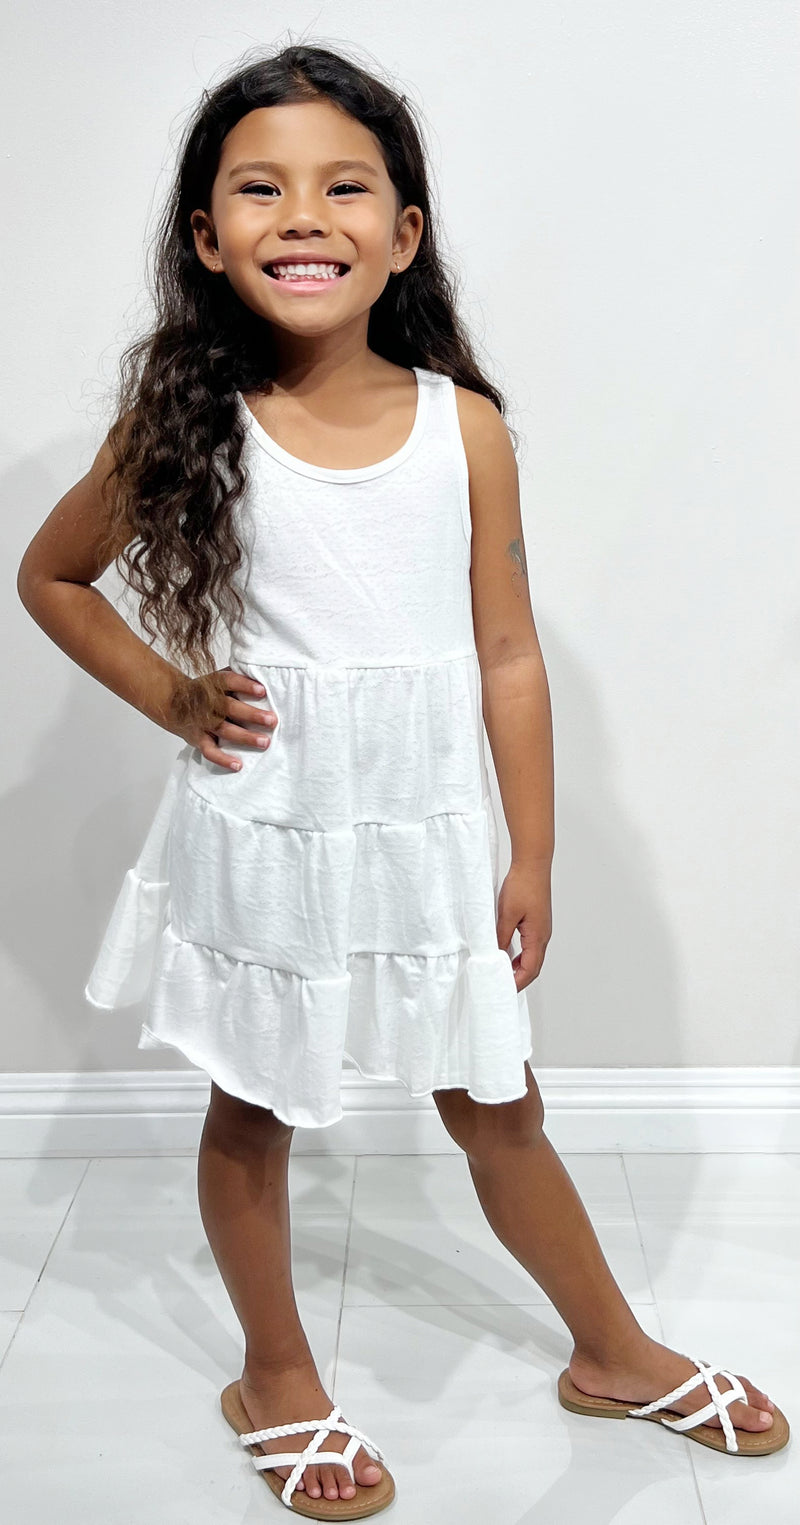 Jeans Warehouse Hawaii - DRESSES 2T-4T - SUNDAY SPECIAL DRESS | KIDS SIZE 2T-4T | By CUTIE PATOOTIE